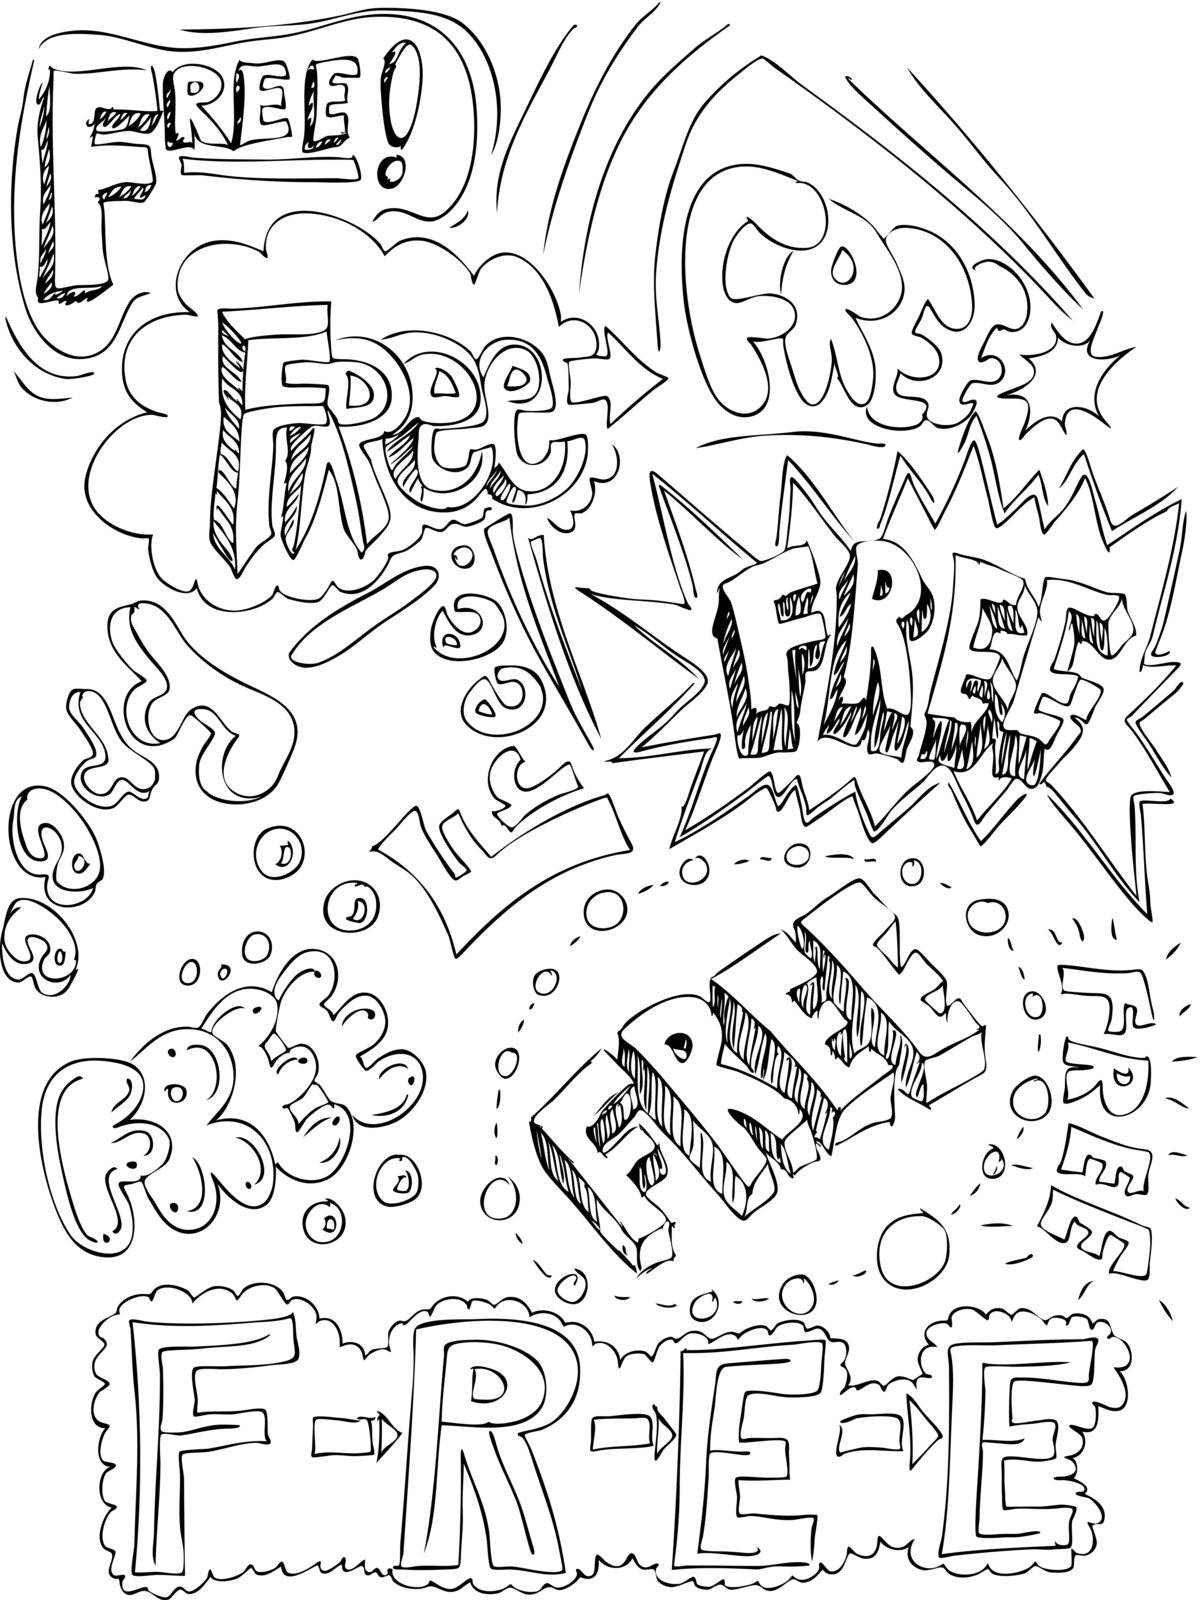 An image using the word Free in a variety of styles.